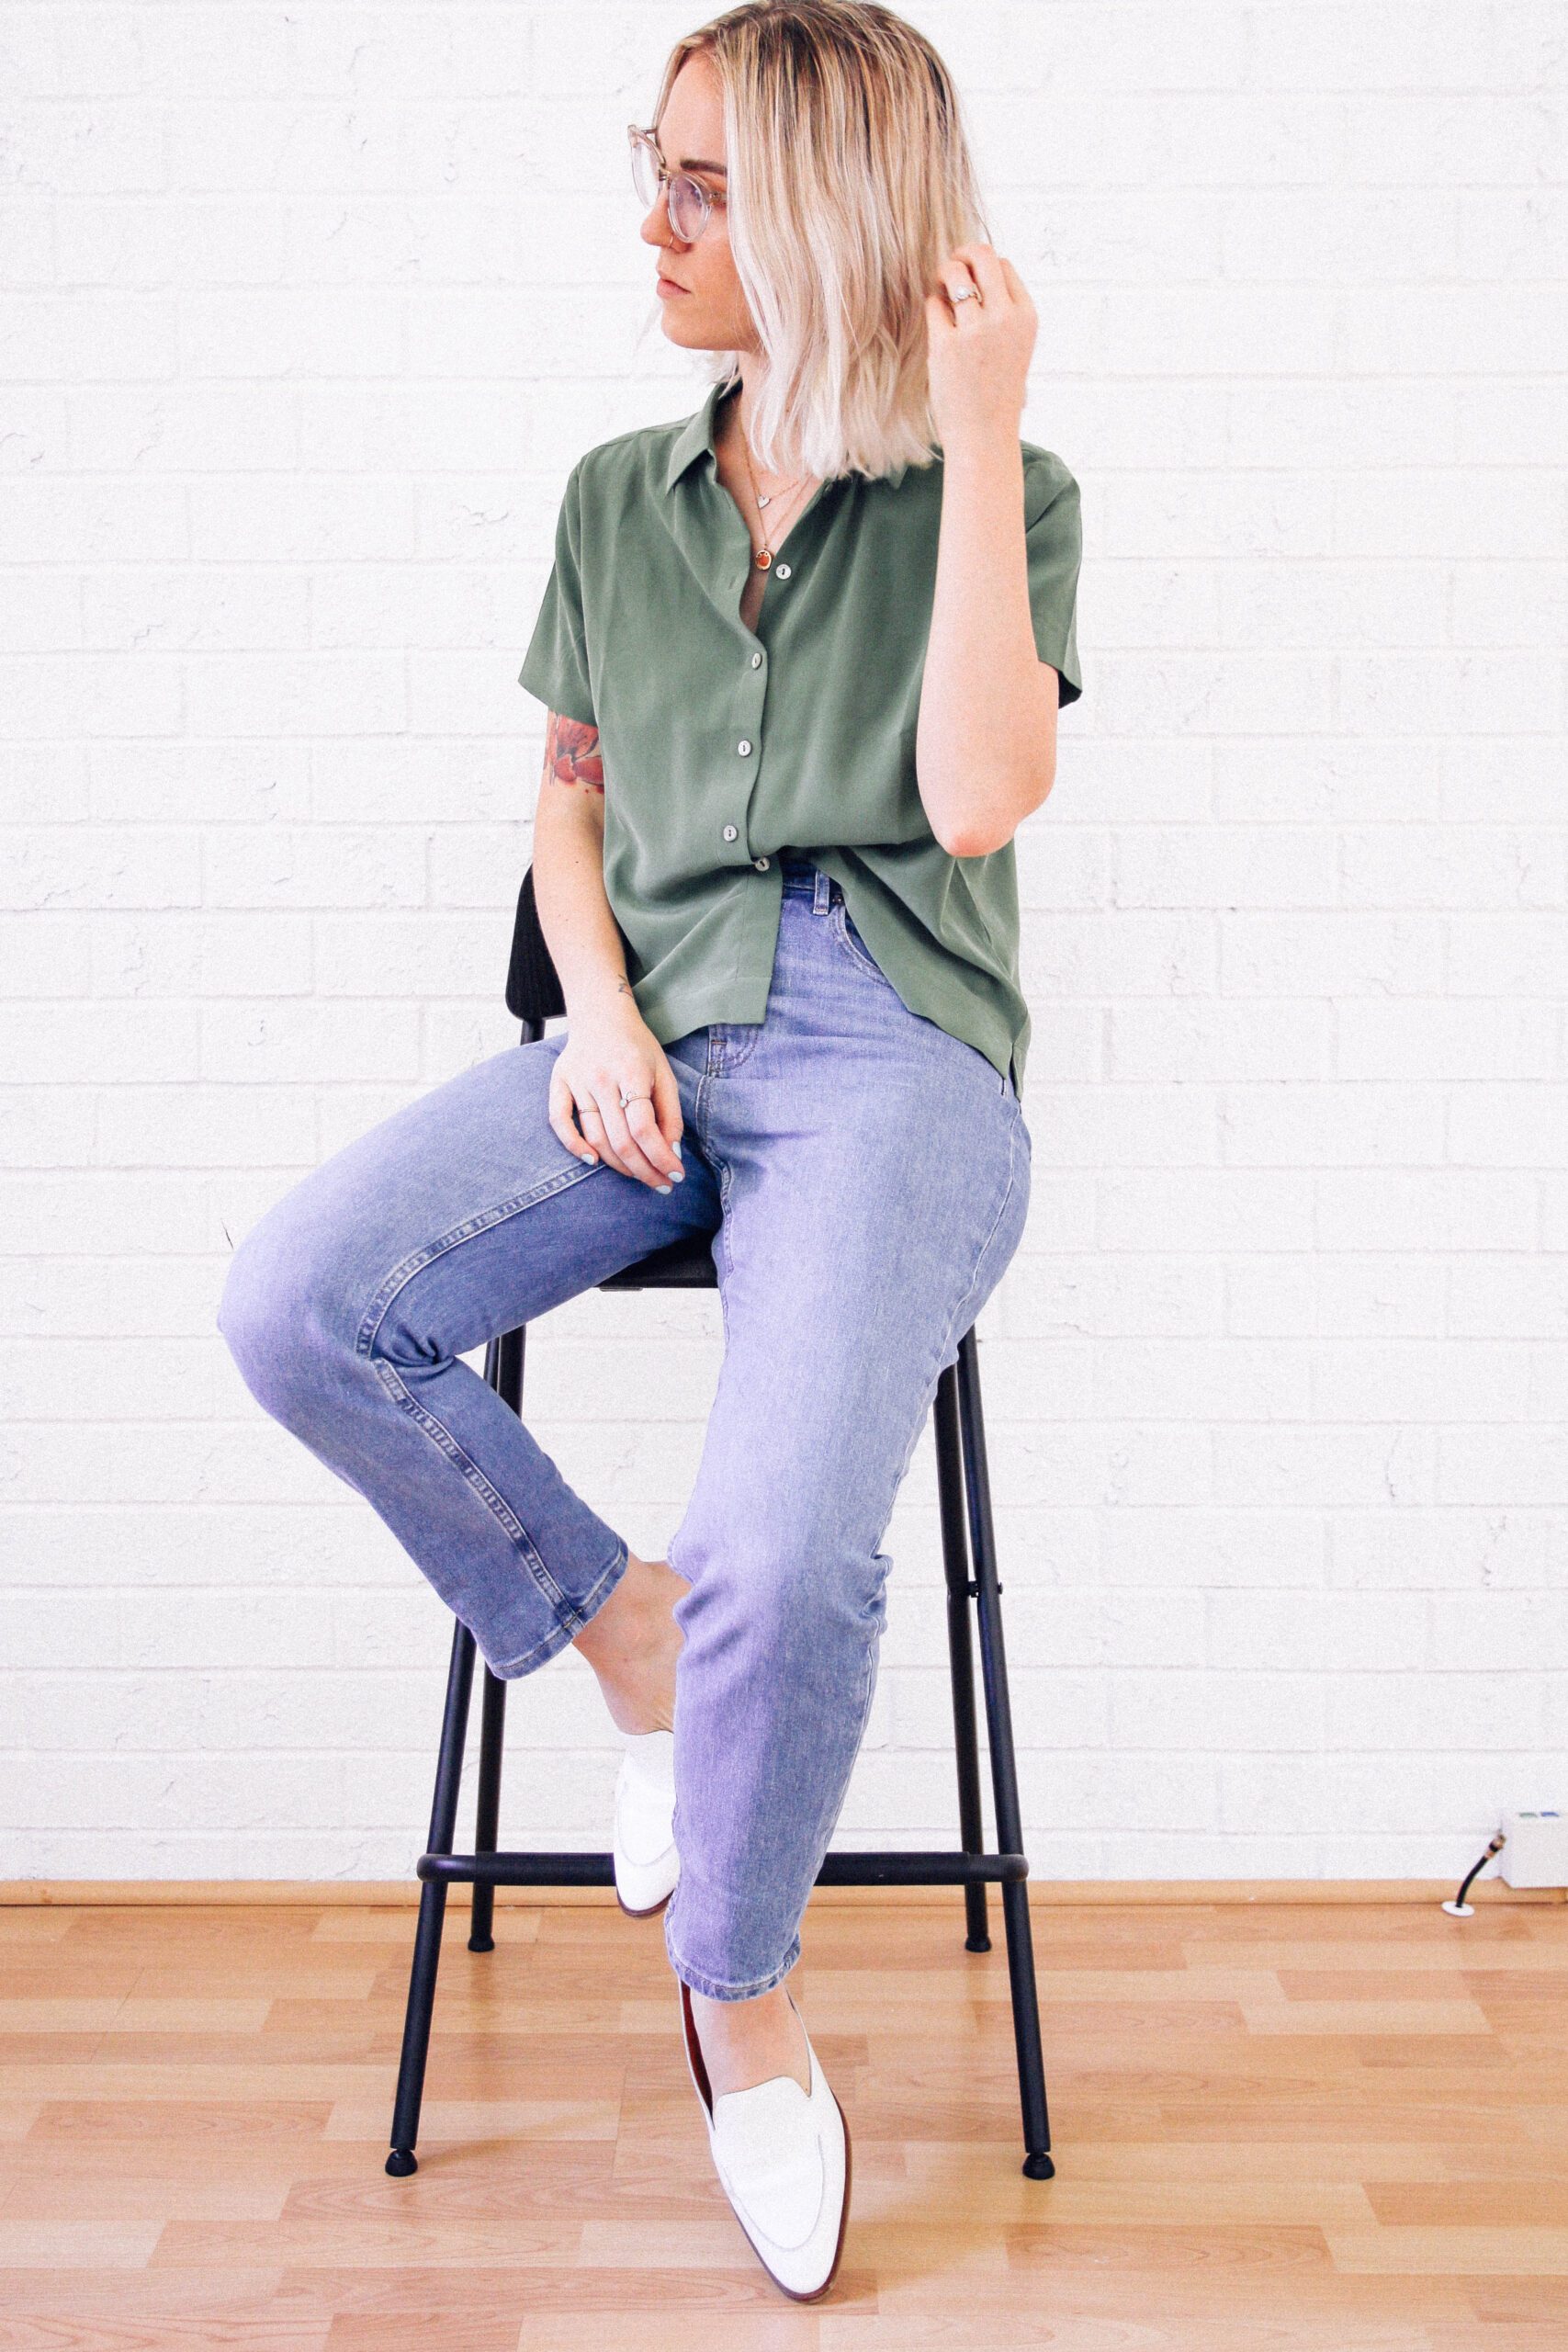 EVERLANE: Classy, cute, ethical AND affordable!